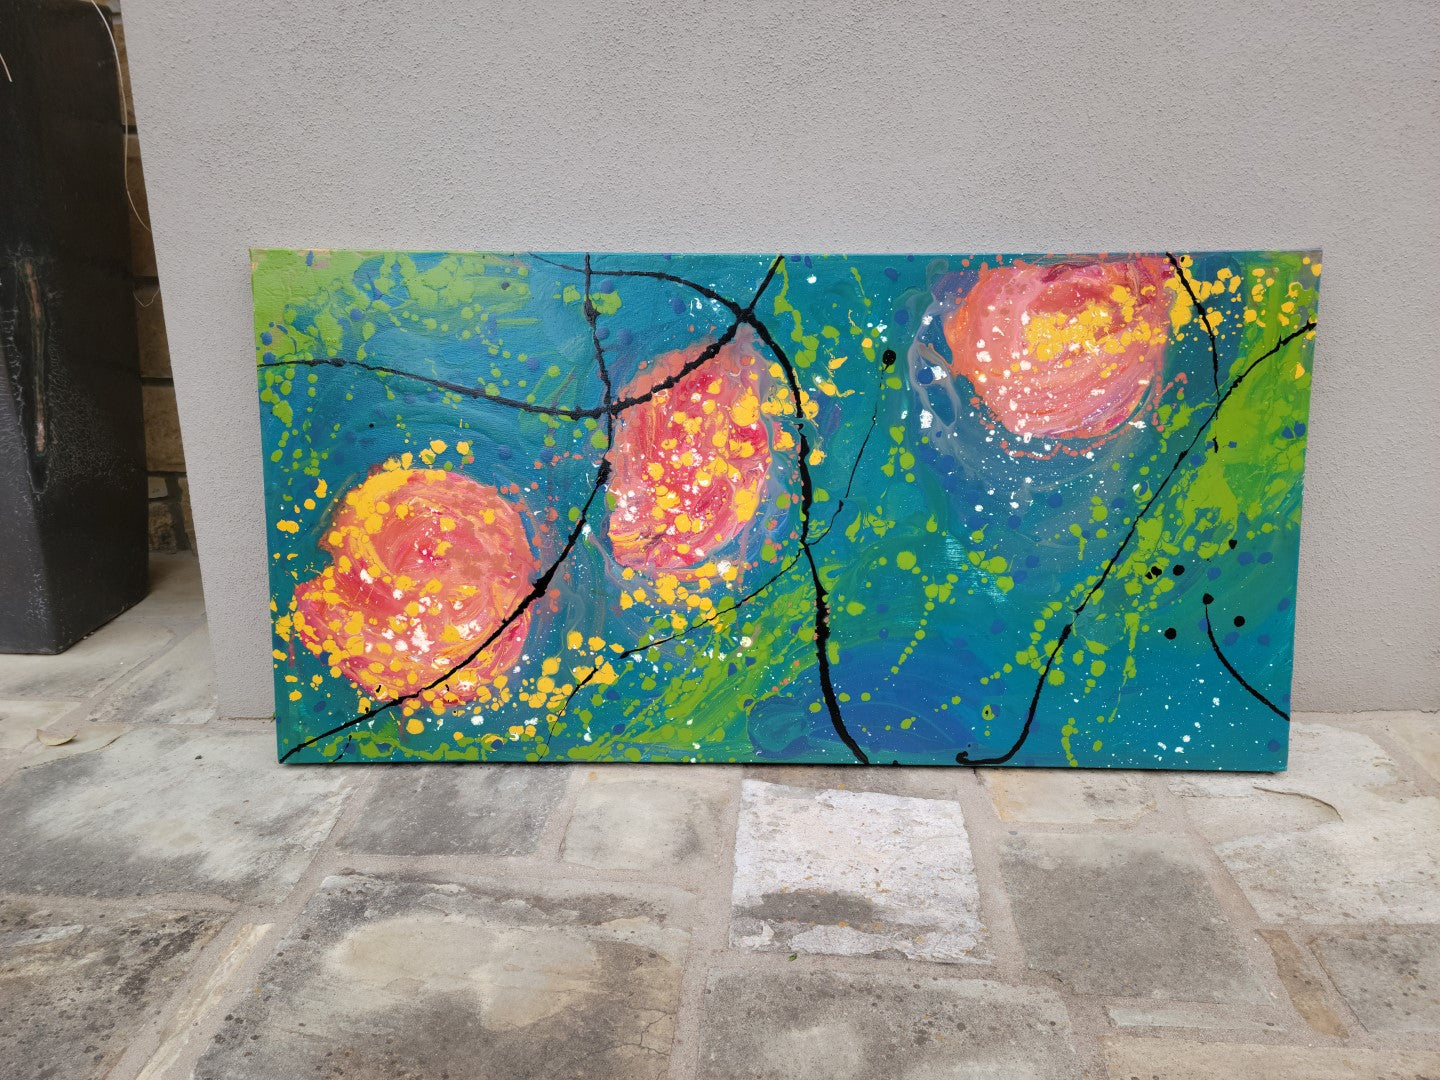 Hysterical Harassment - Original Abstract Painting in Austin Texas 24" x 48"